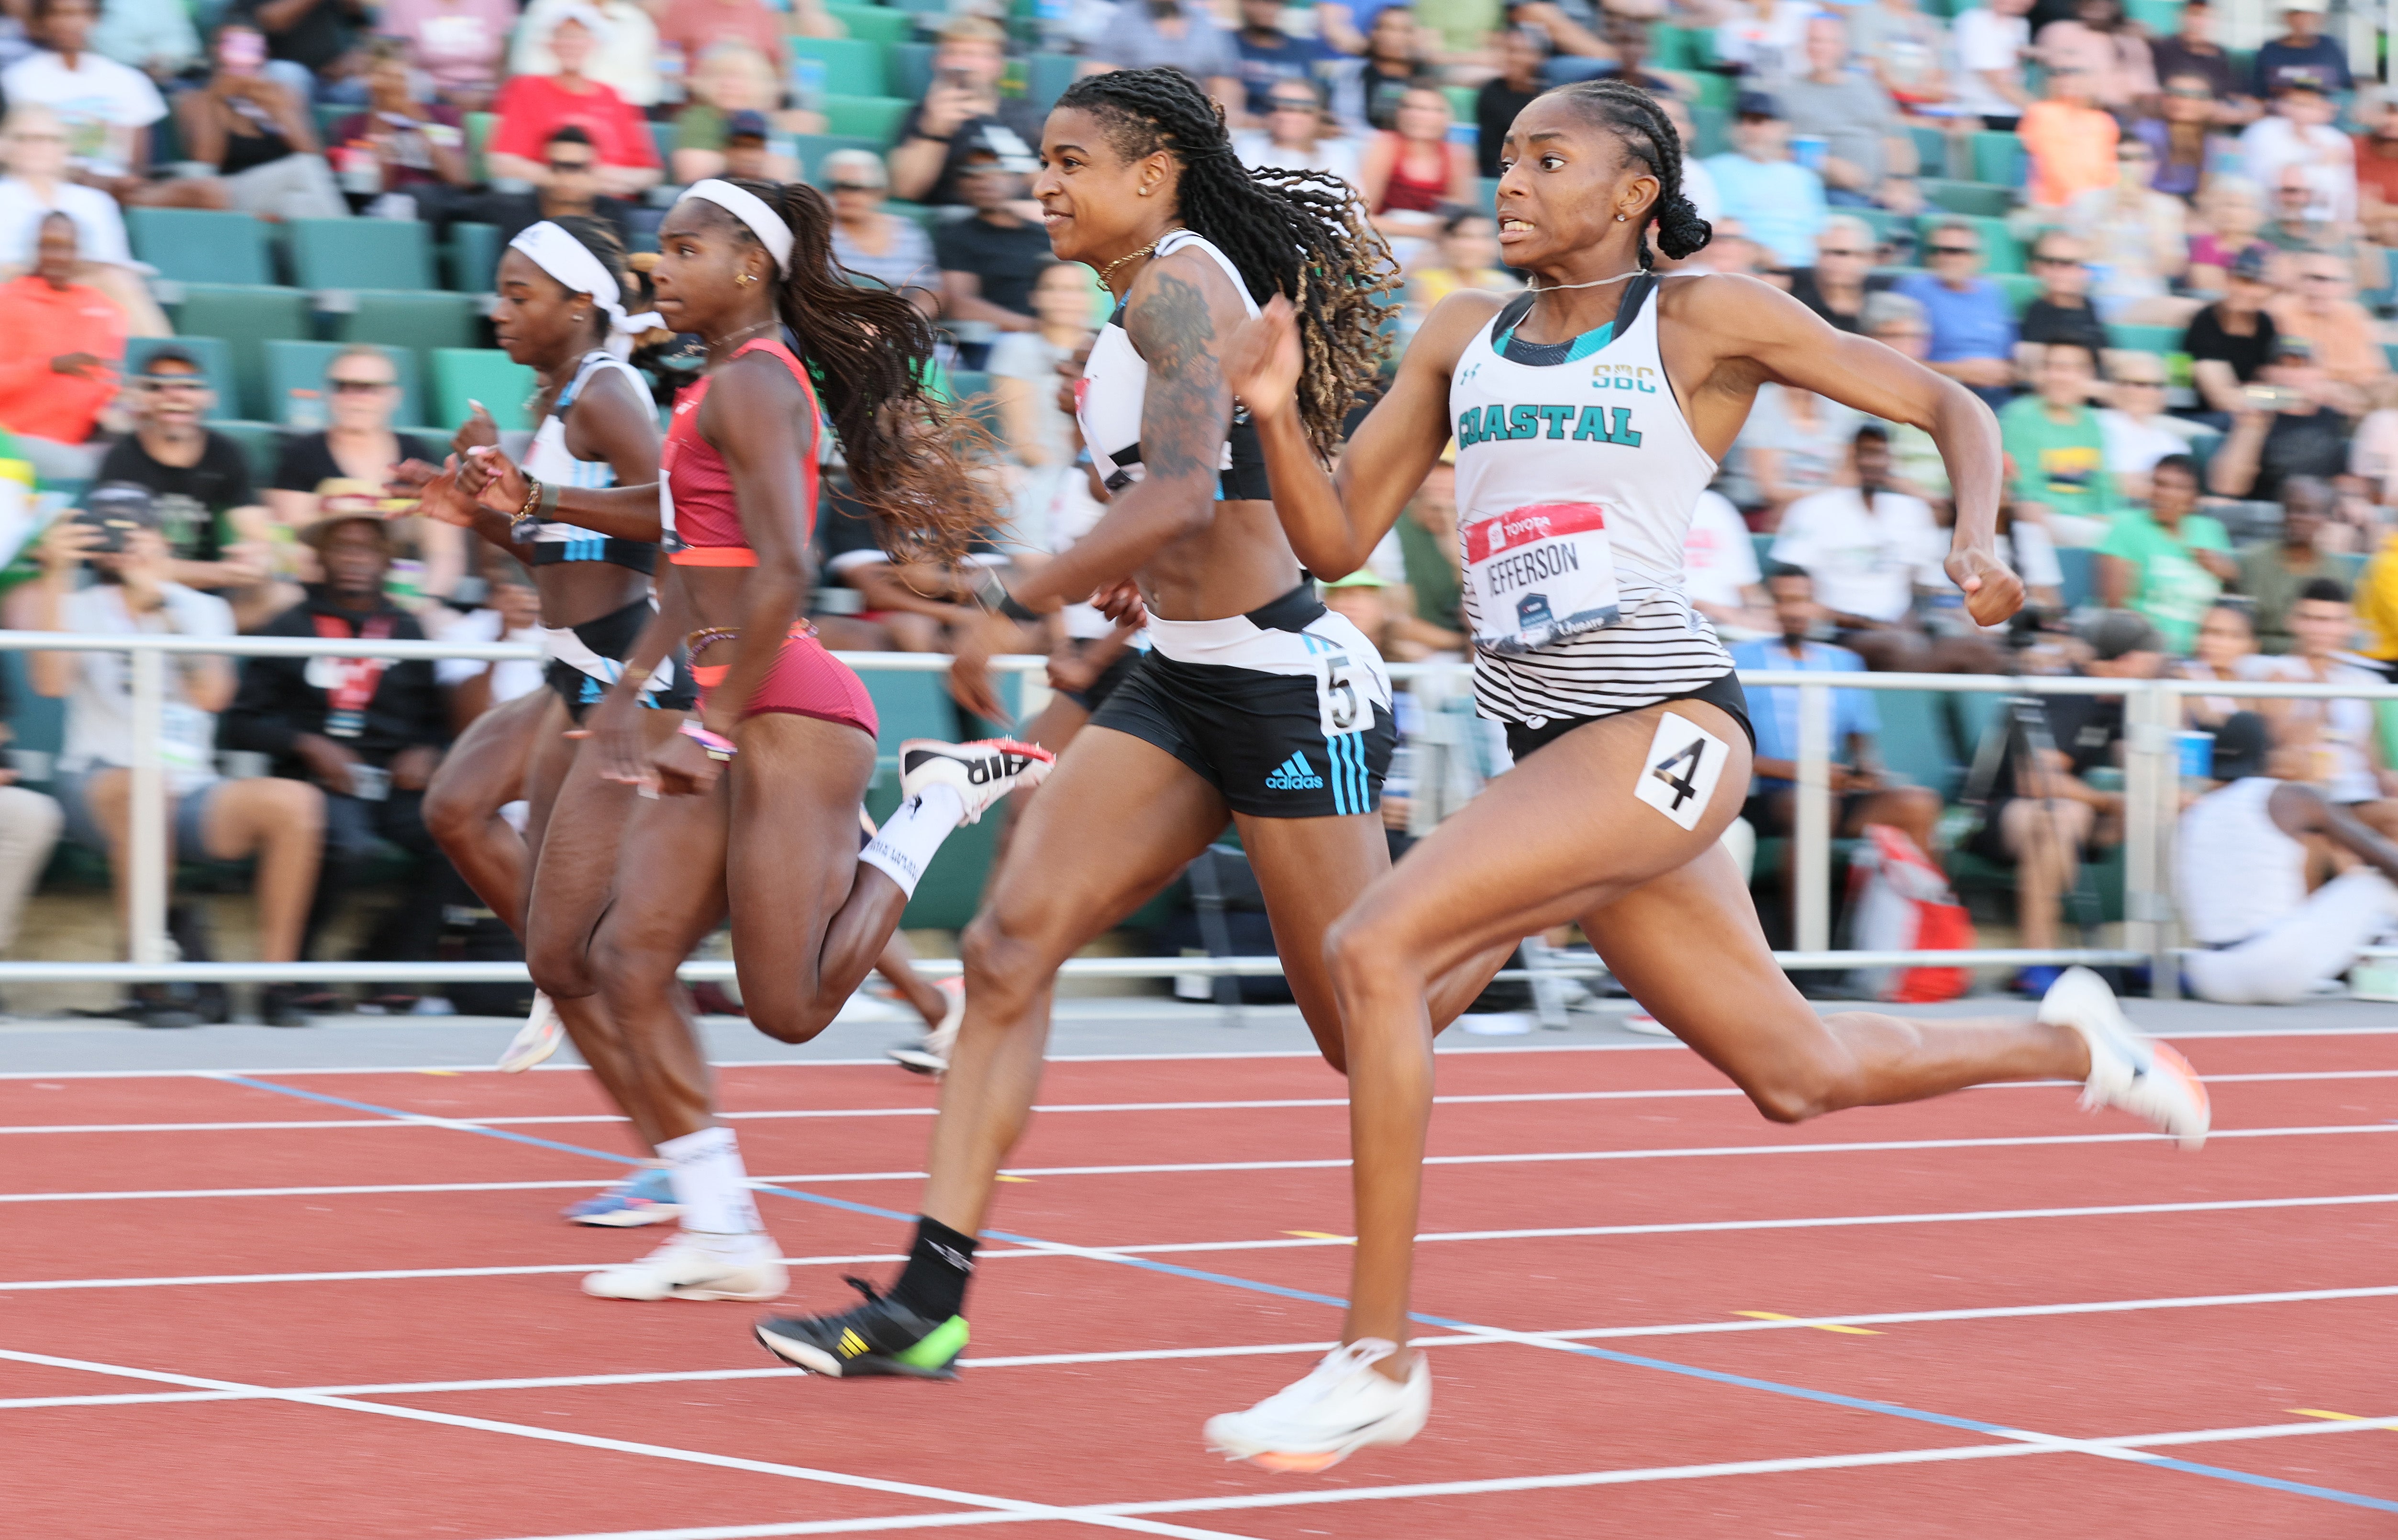 Melissa Jefferson, right, wins the 100m final at the USATF Championships